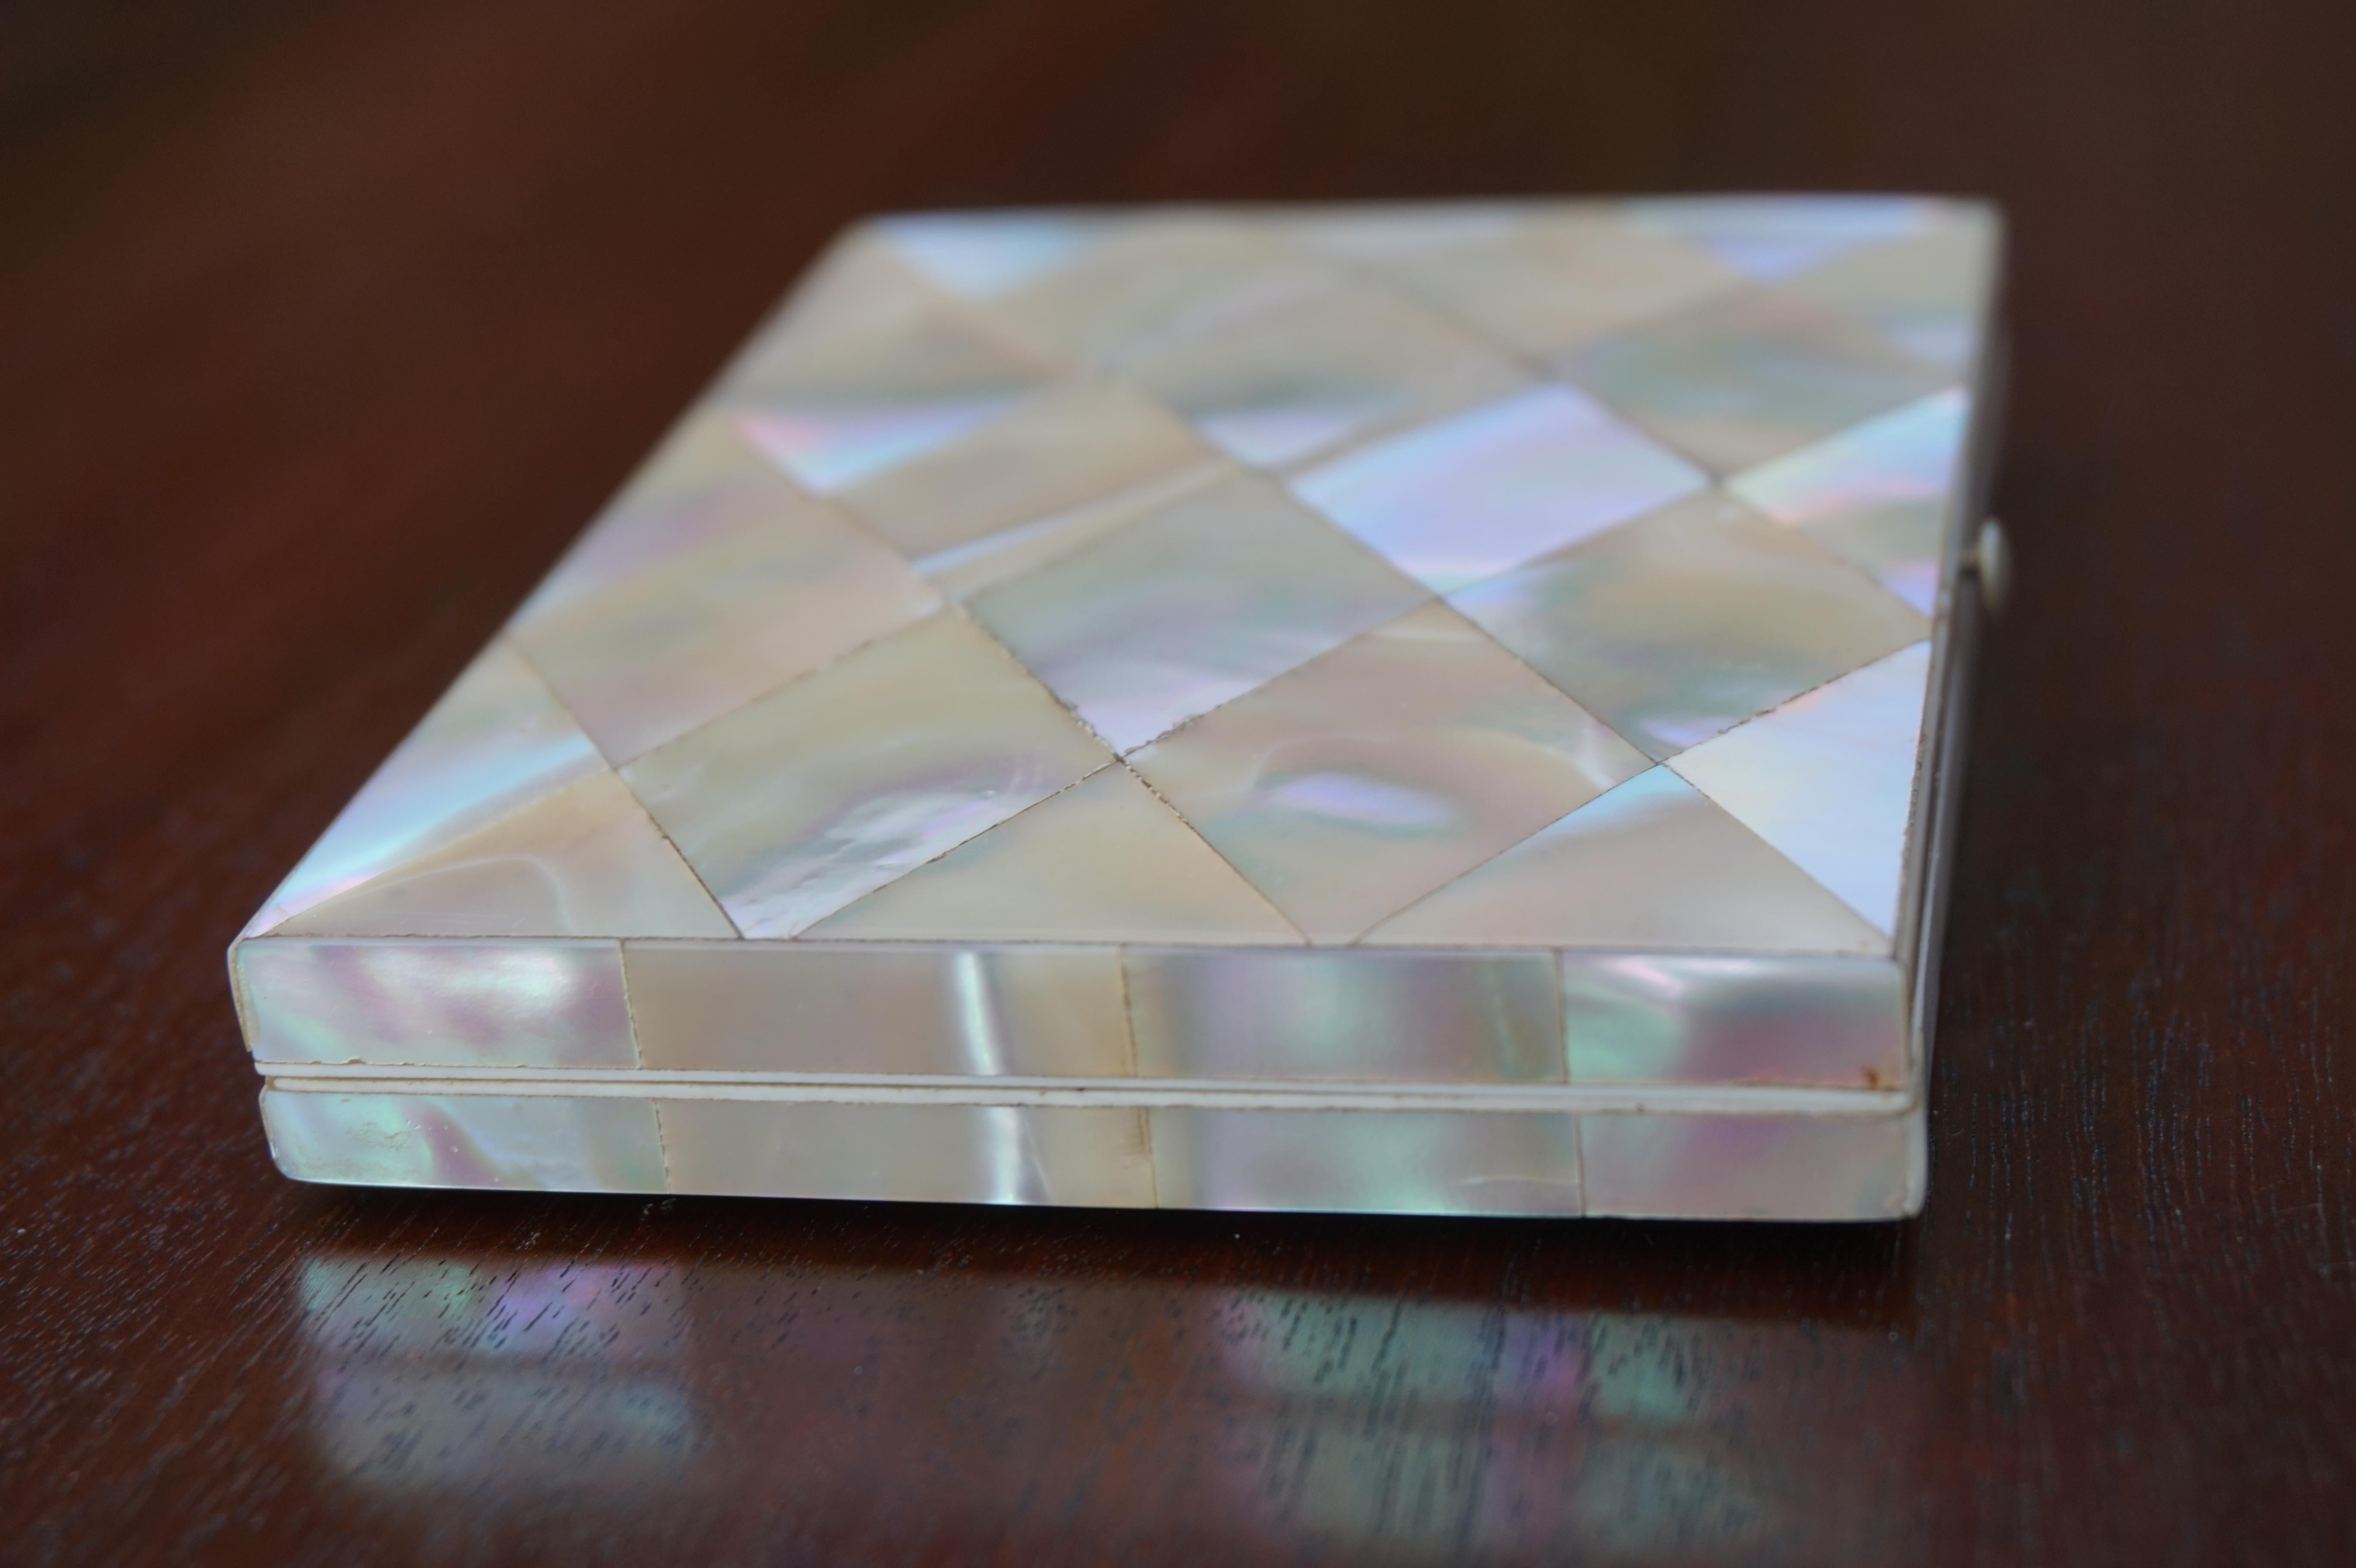 Dutch Stunning & Near Mint Condition Mid-19th Century Mother of Pearl Card Case / Box